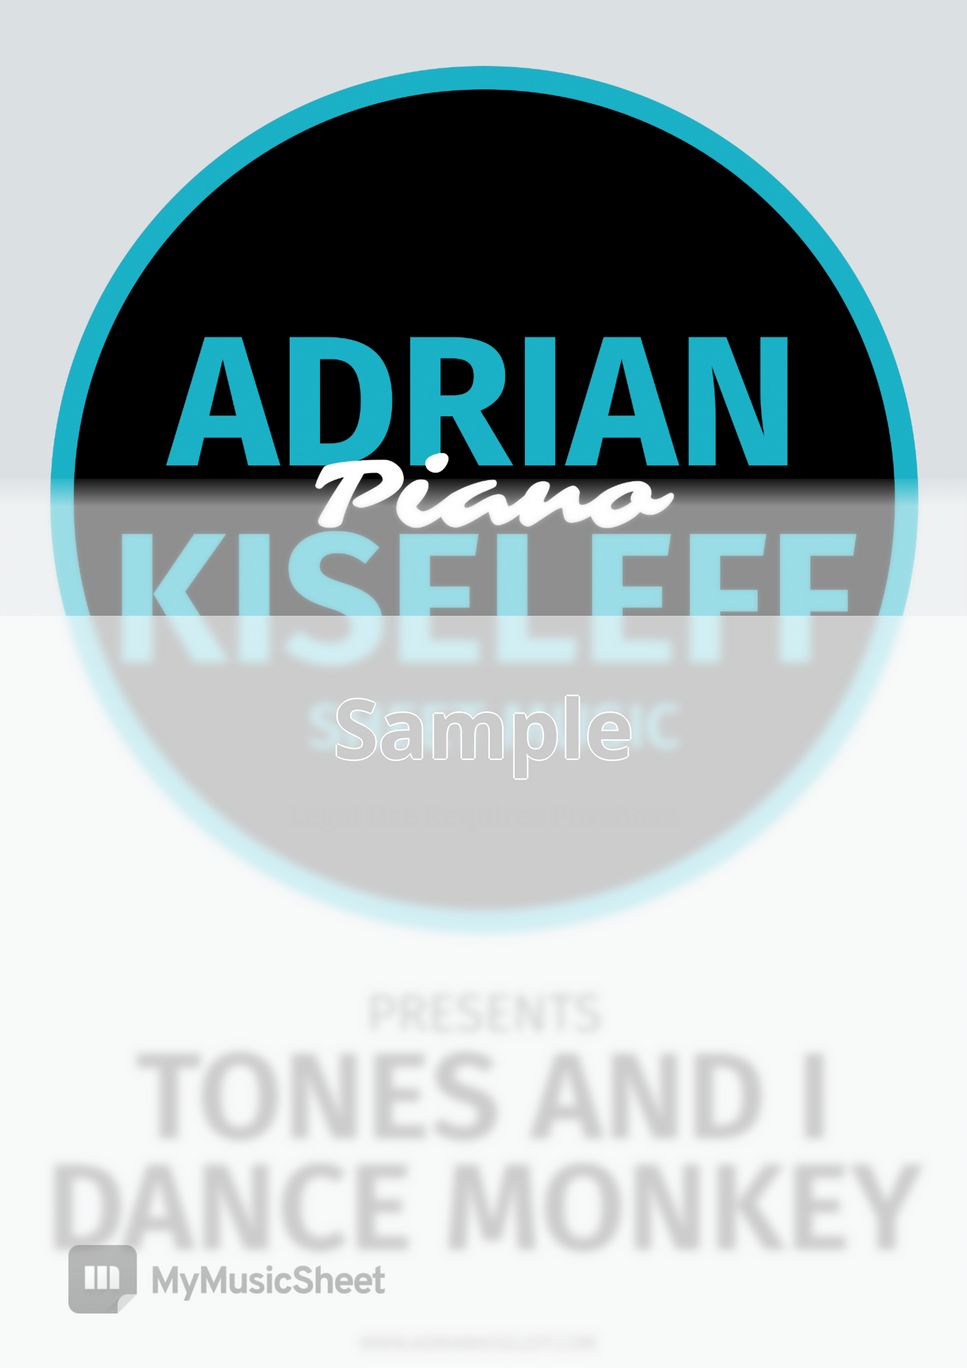 Tones and I - Dance Monkey (For Piano Solo) by Adrian Kiseleff